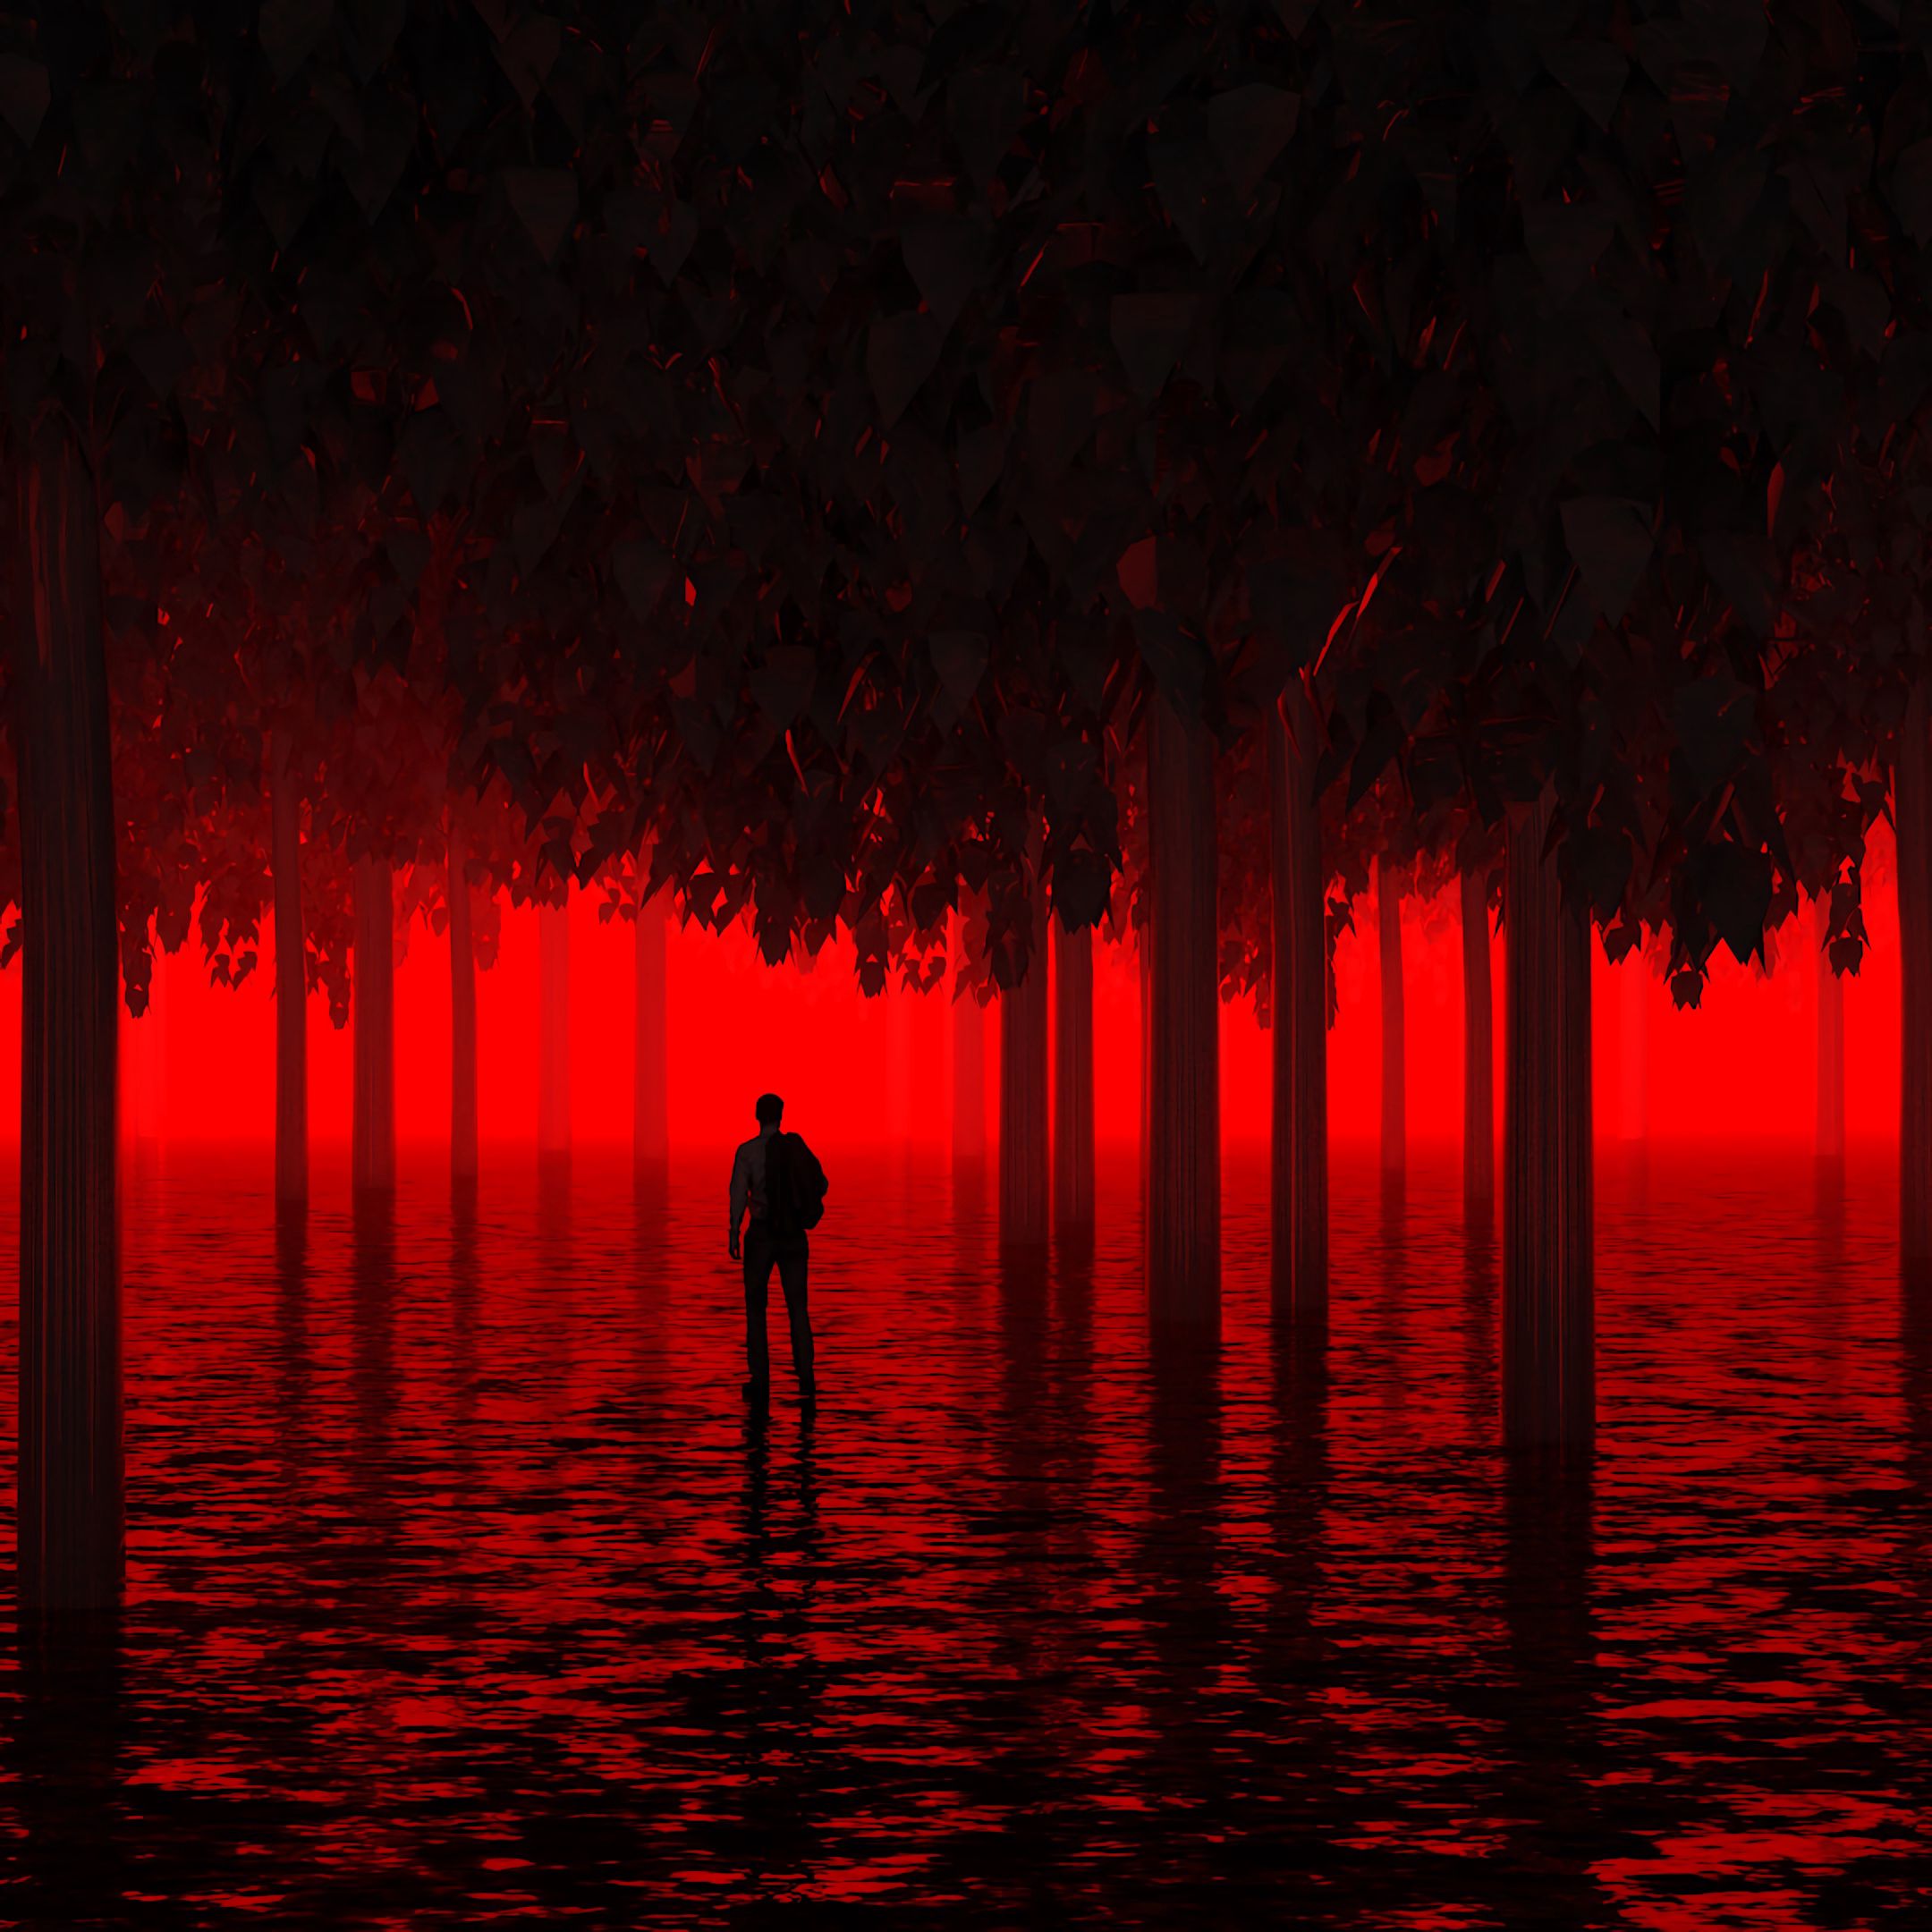 light, neon, human, dark, water, trees, red, shine, person, flooded, submerged cellphone